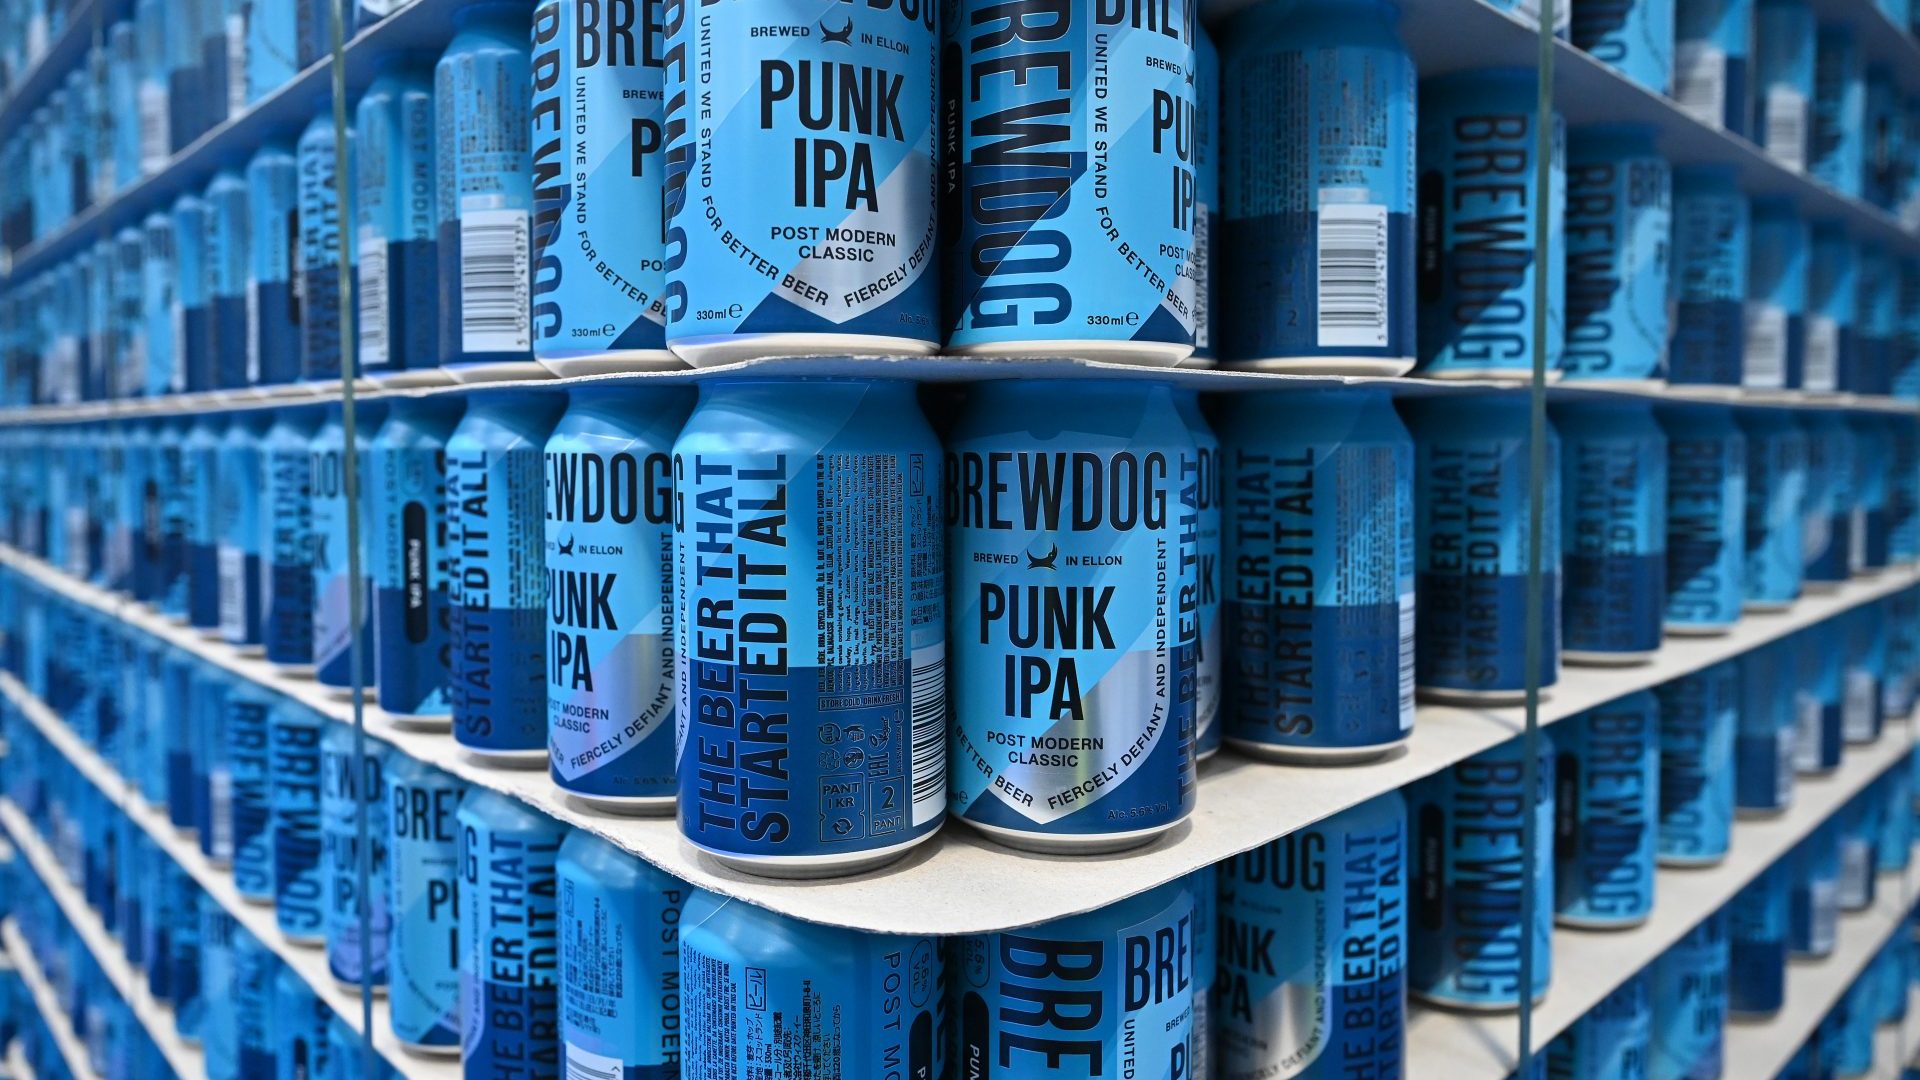 Stacks of BrewDog beer cans at their brewery in Ellon, Scotland (Photo by Jeff J Mitchell/Getty Images)